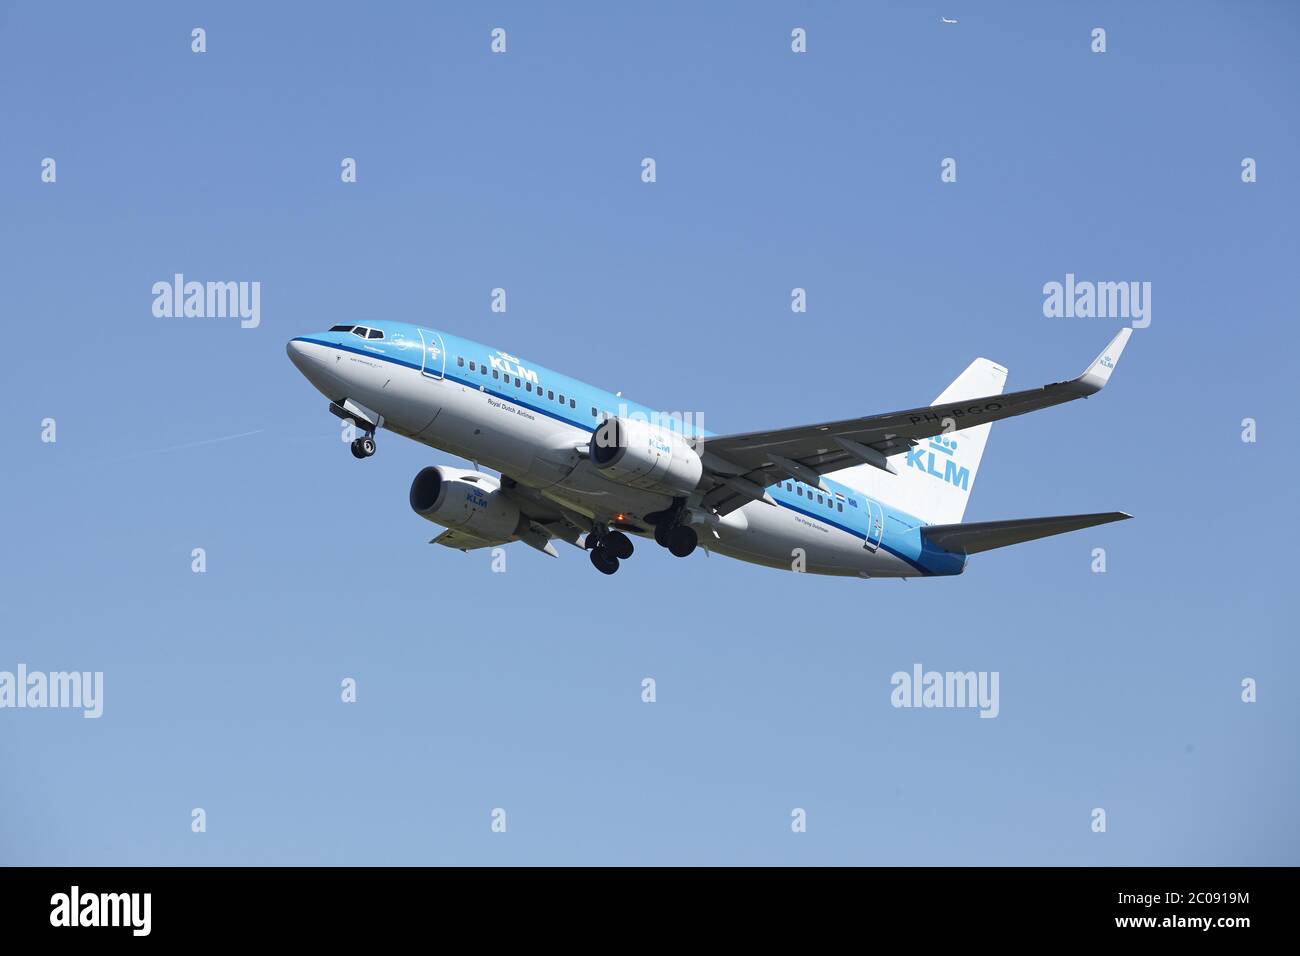 Flughafen Schiphol High Resolution Stock Photography and Images - Alamy